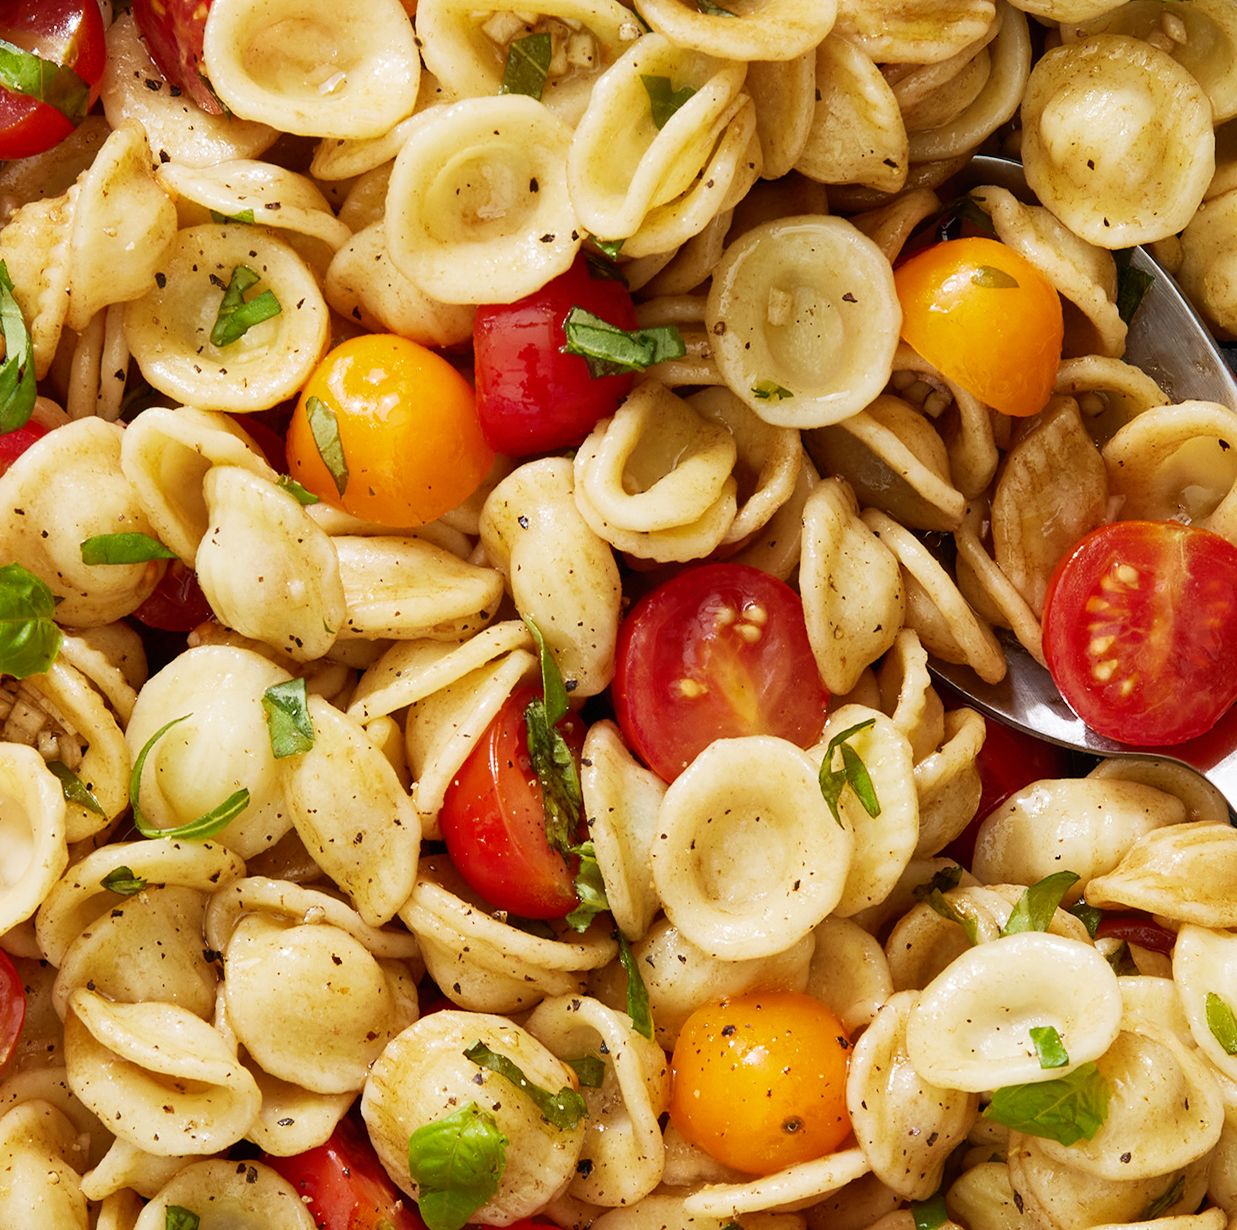 This Bruschetta Pasta Salad Is The Epitome Of Summer In A Bowl